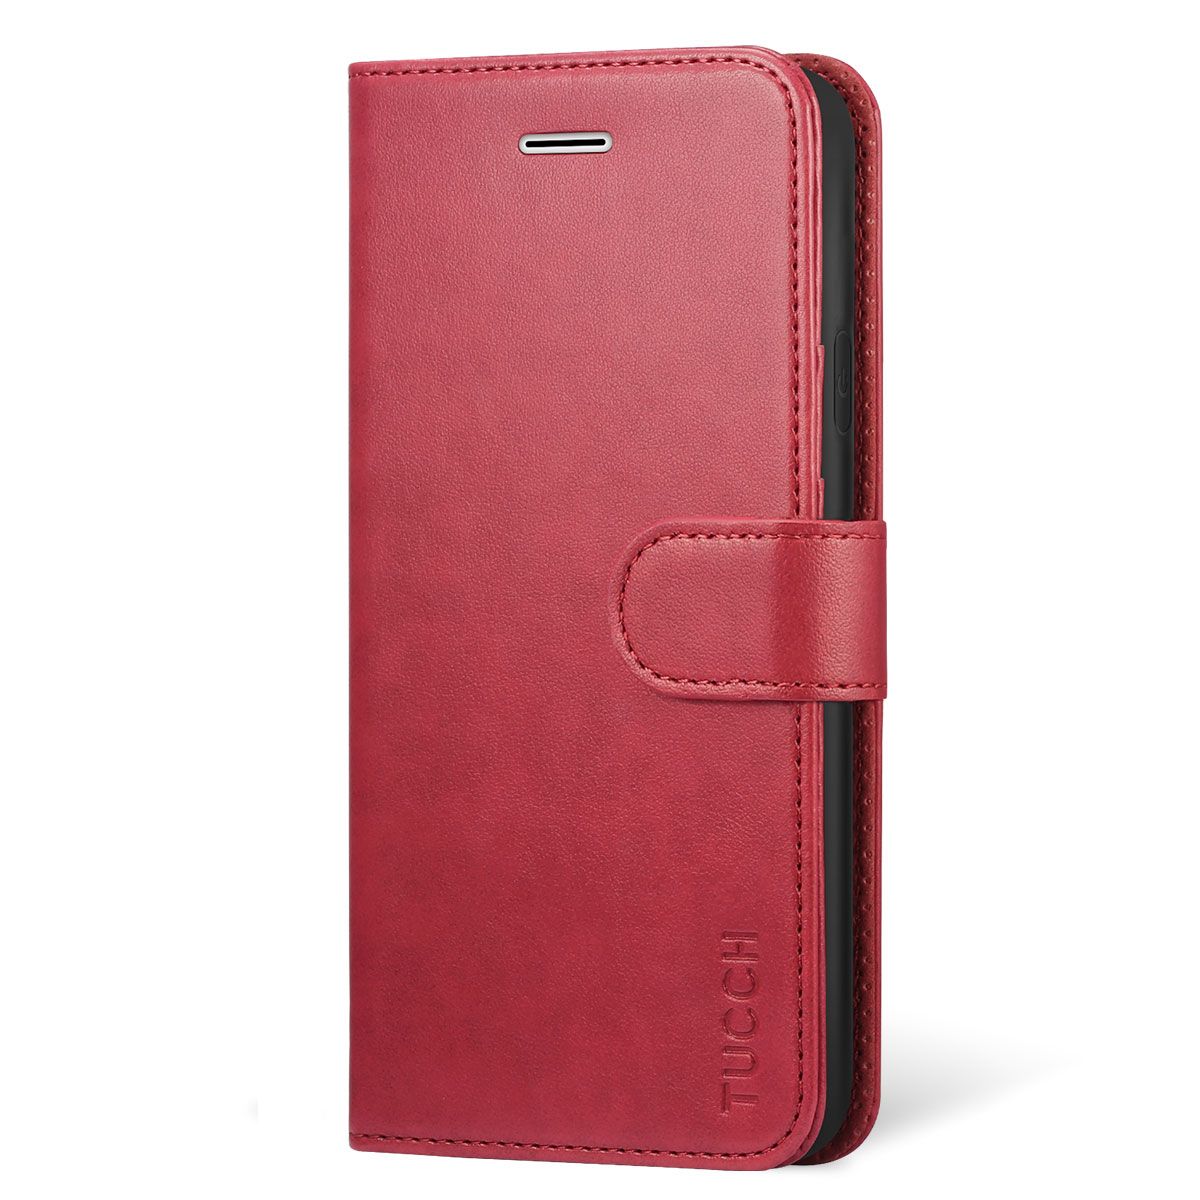 Leather Cover Compatible with iPhone X red Wallet Case for iPhone X 